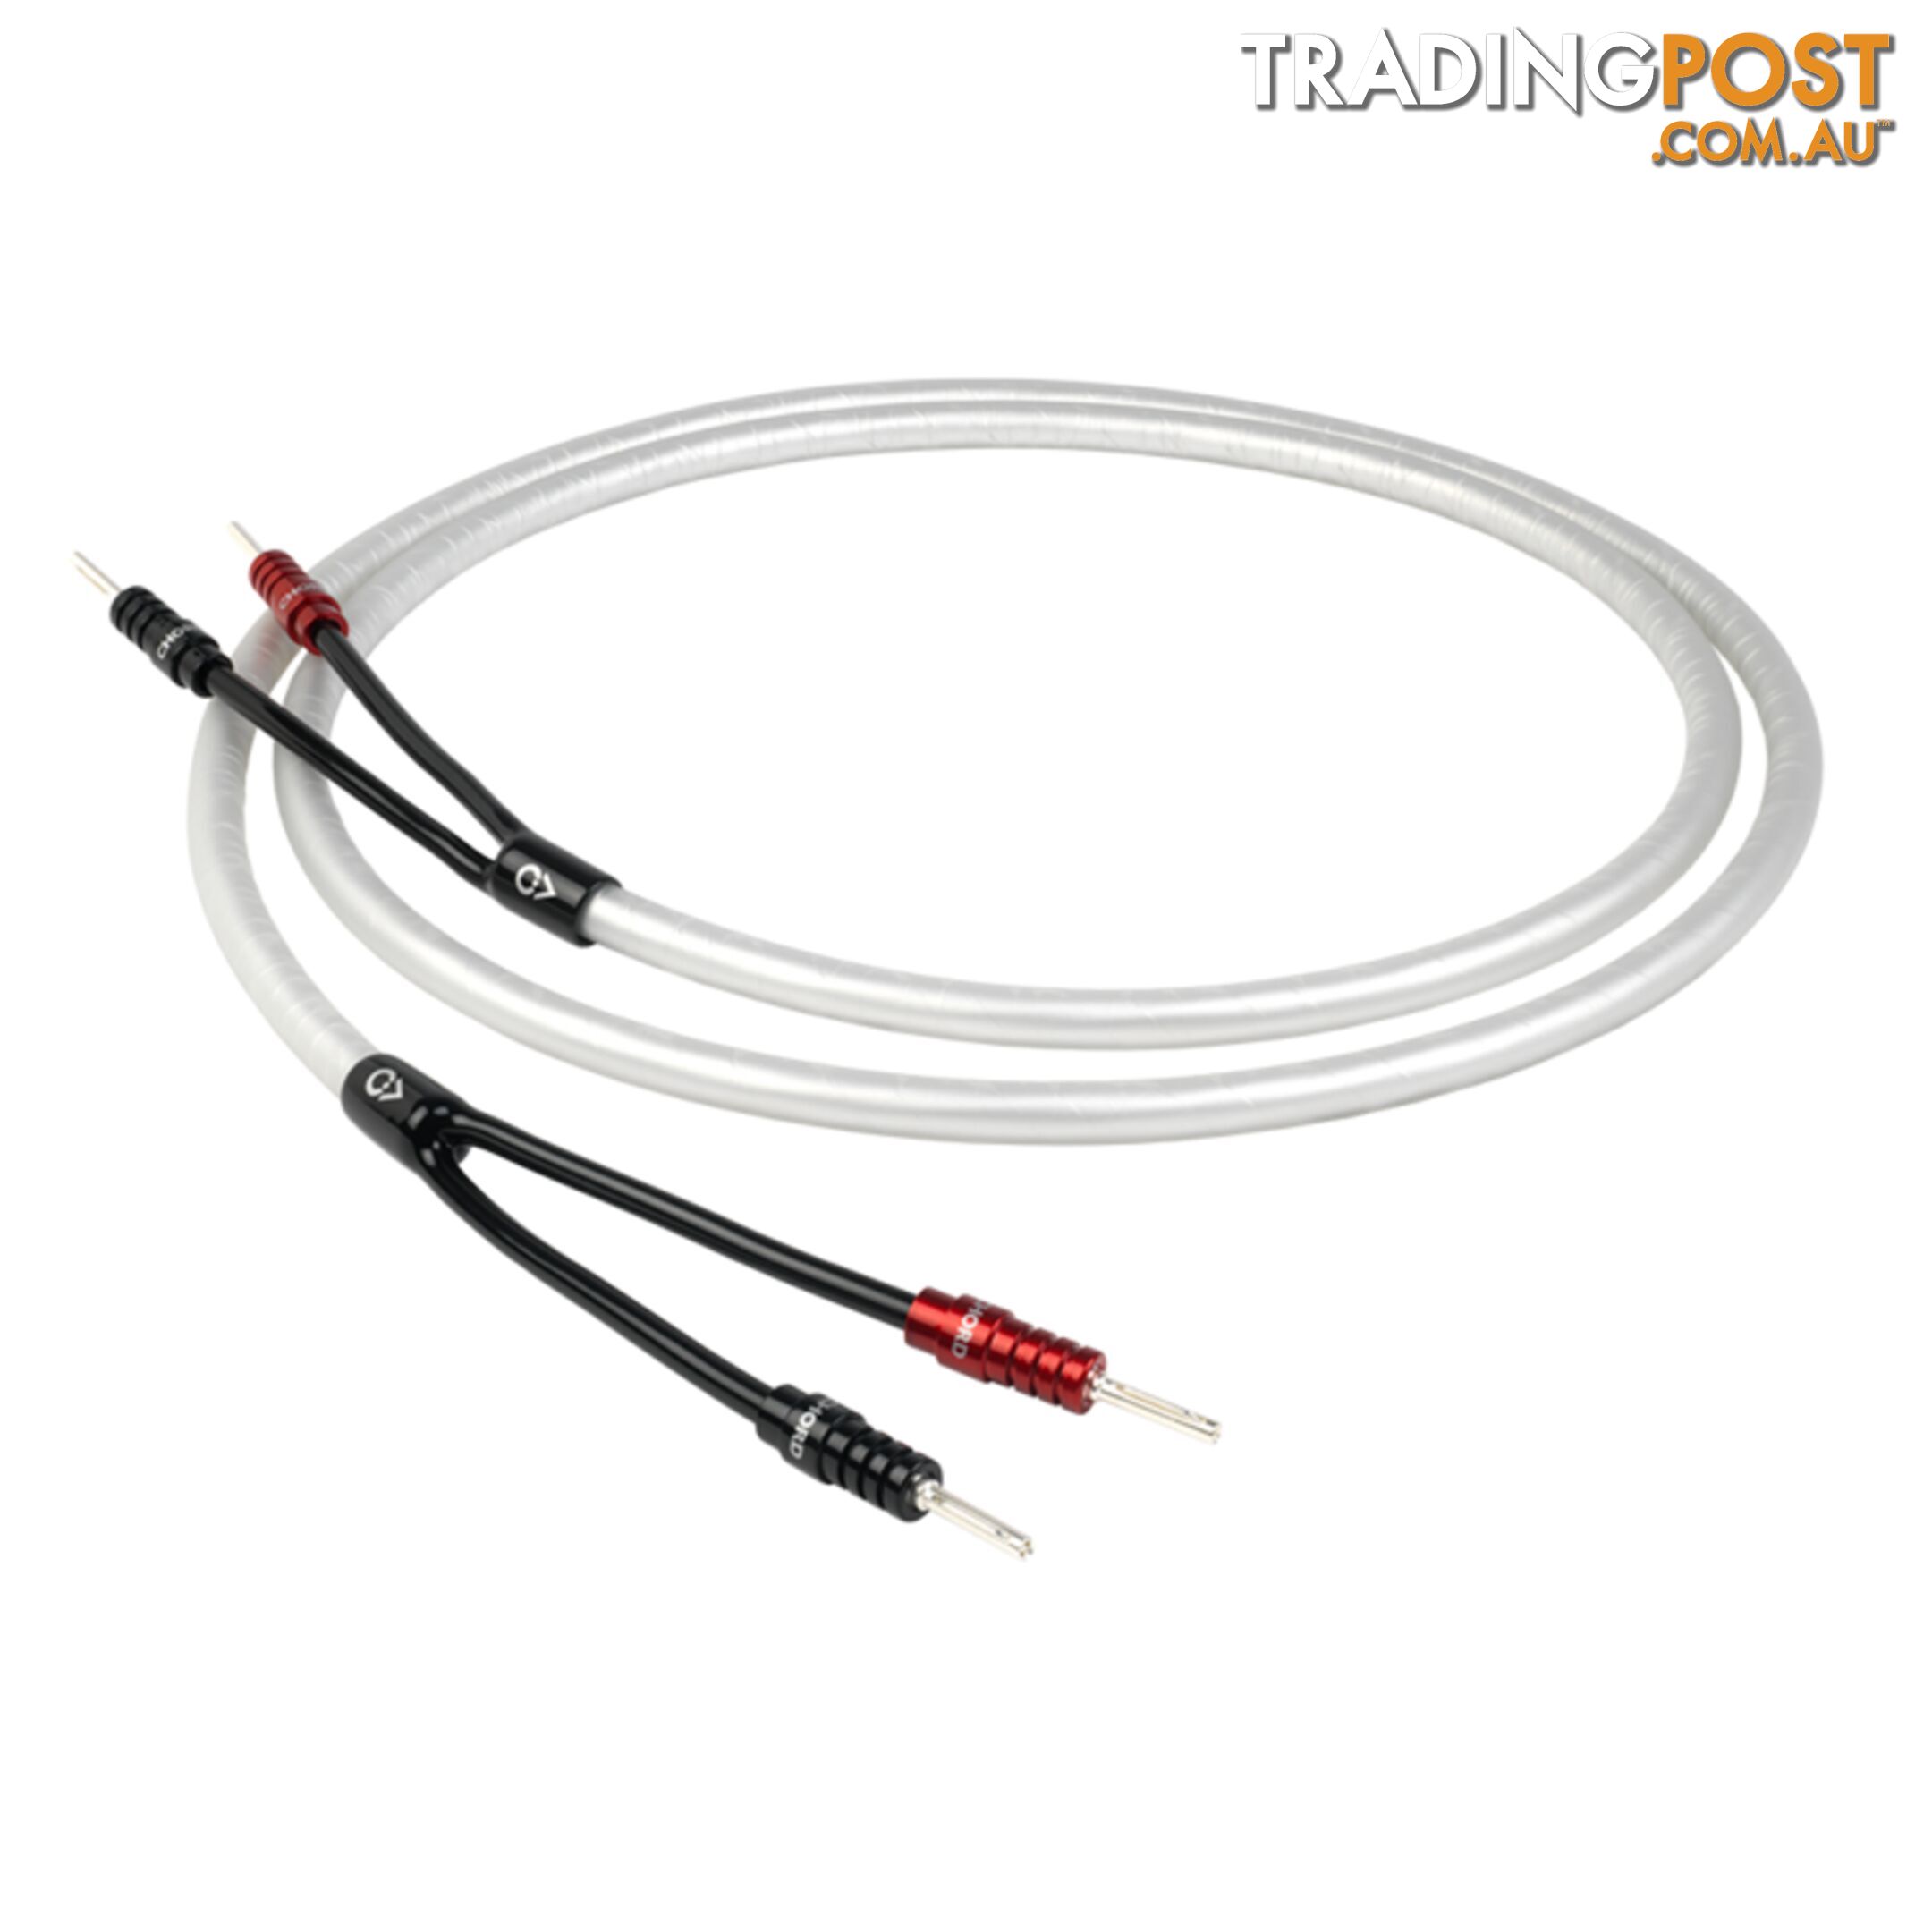 ClearwayX Speaker Cable (3m pair)